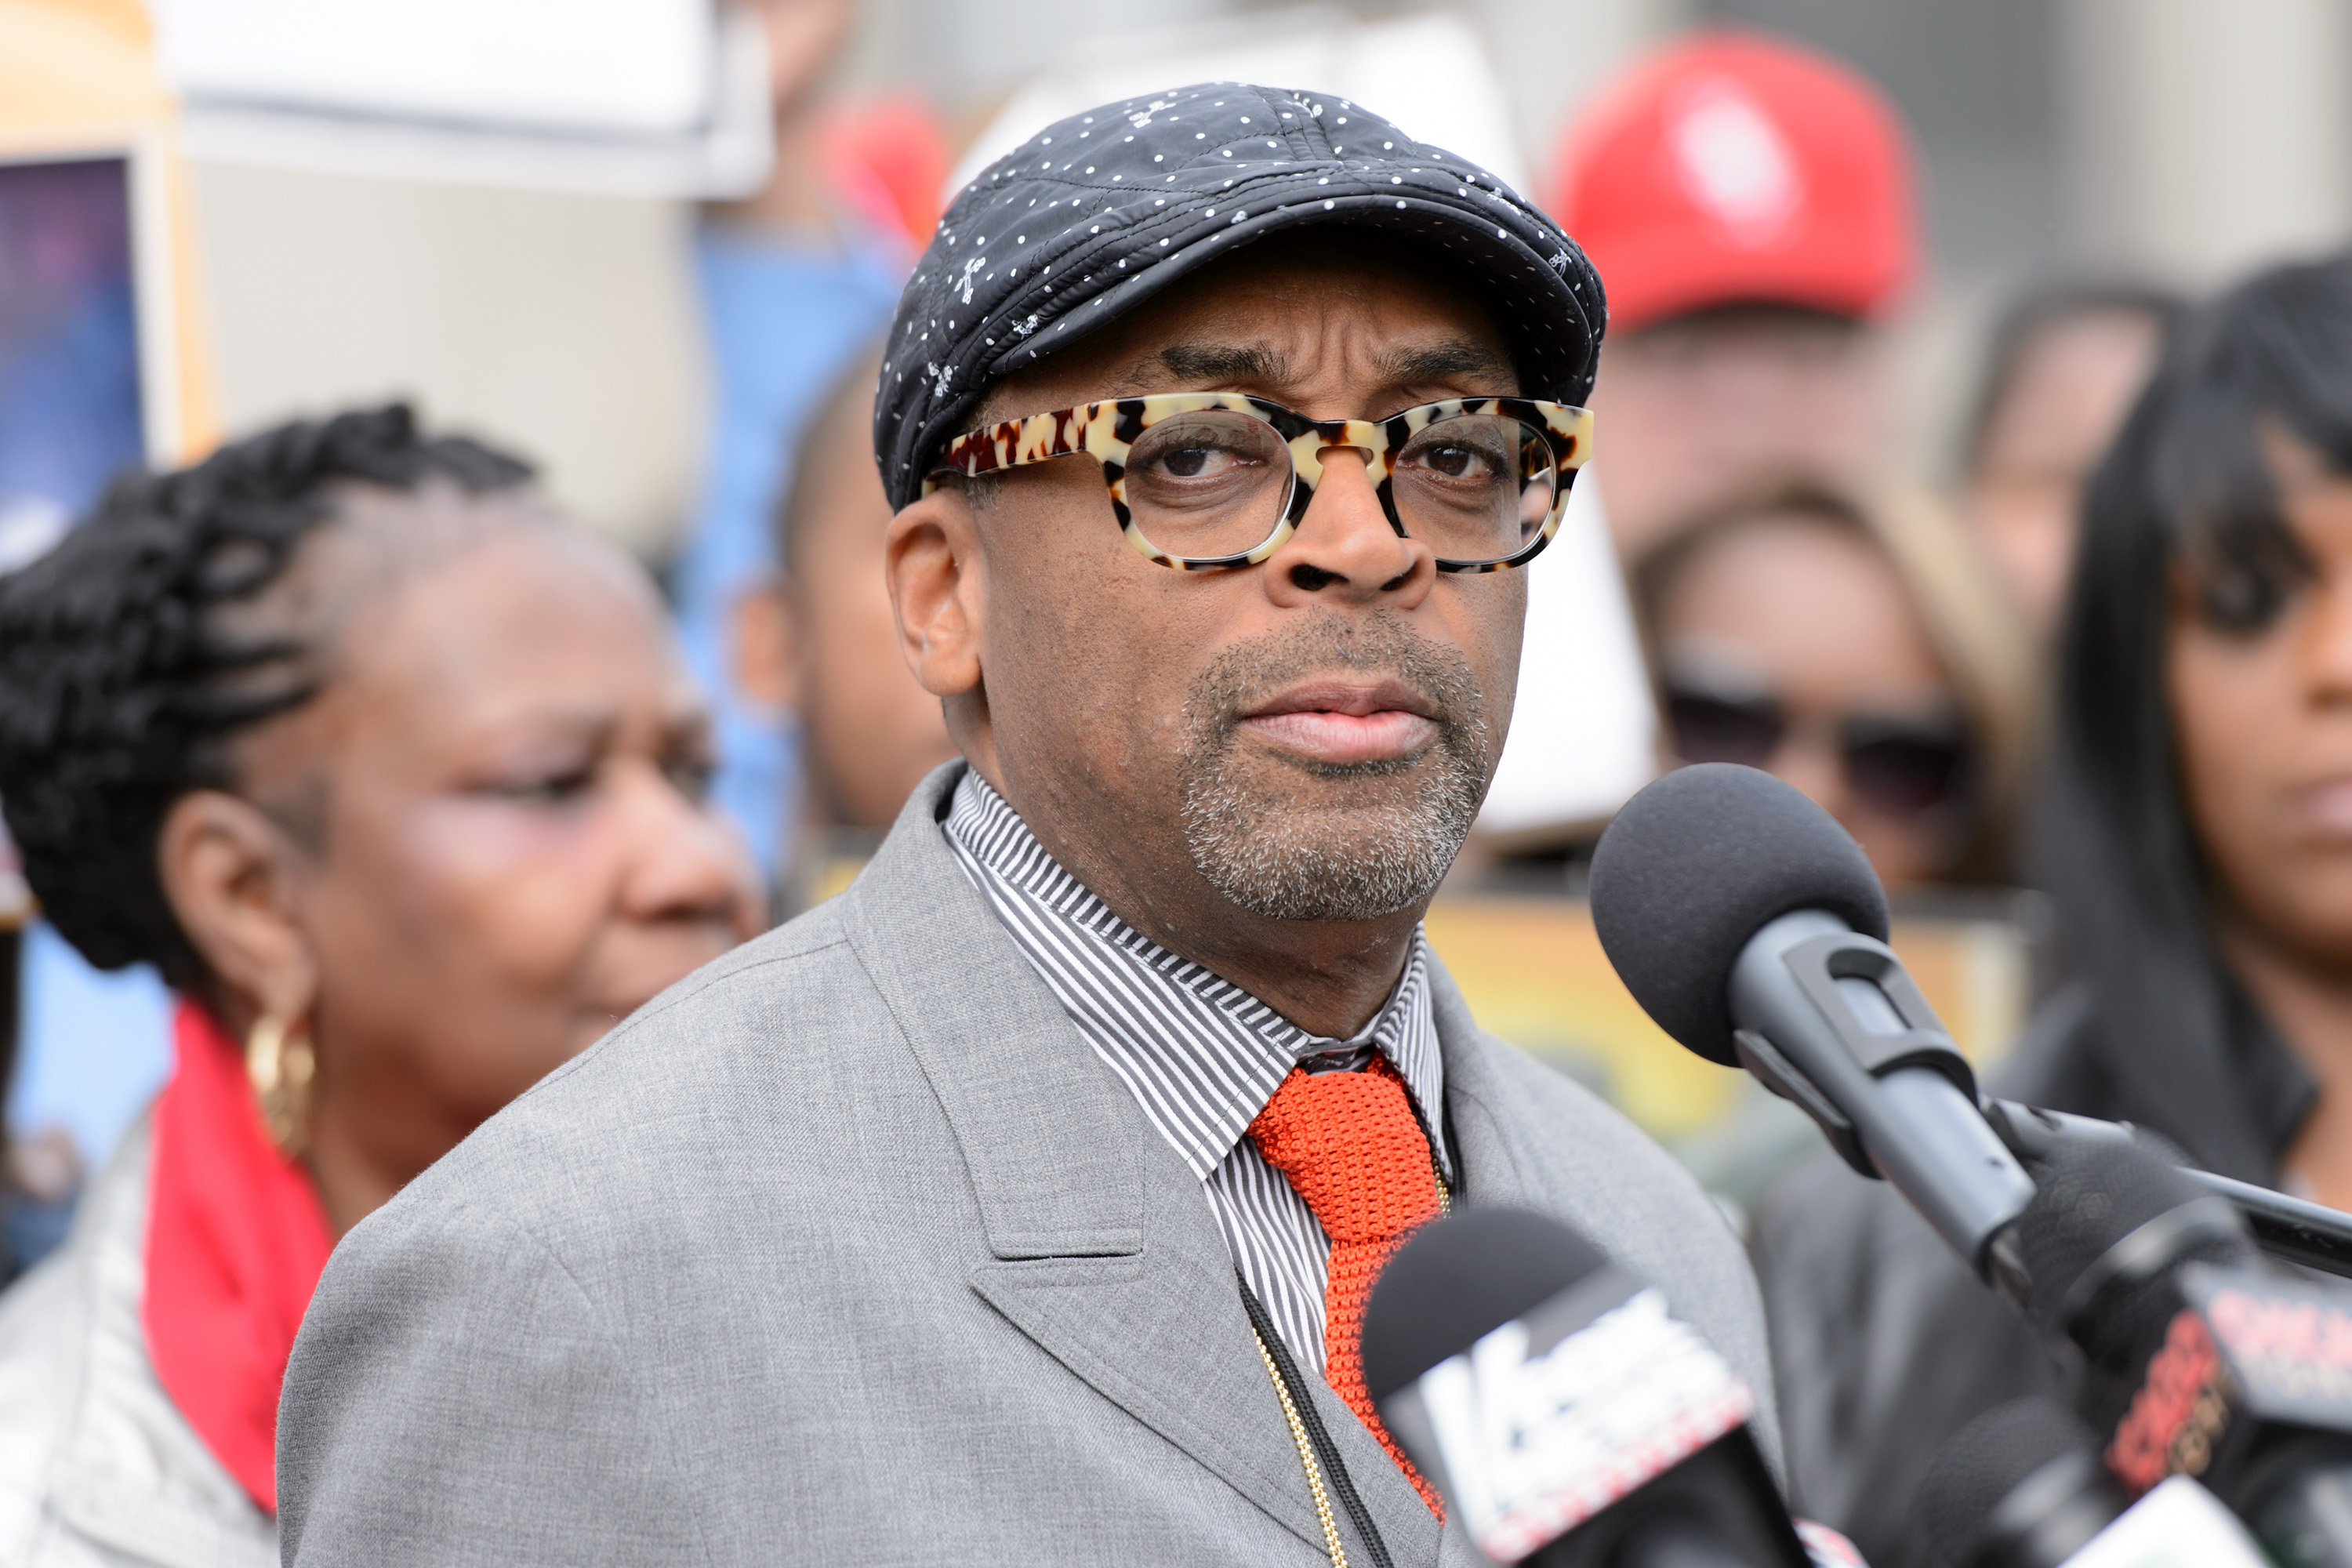 Spike Lee attends a press conference to discuss the upcoming film 'Chiraq' at St. Sabina Church on May 14, 2015 in Chicago.